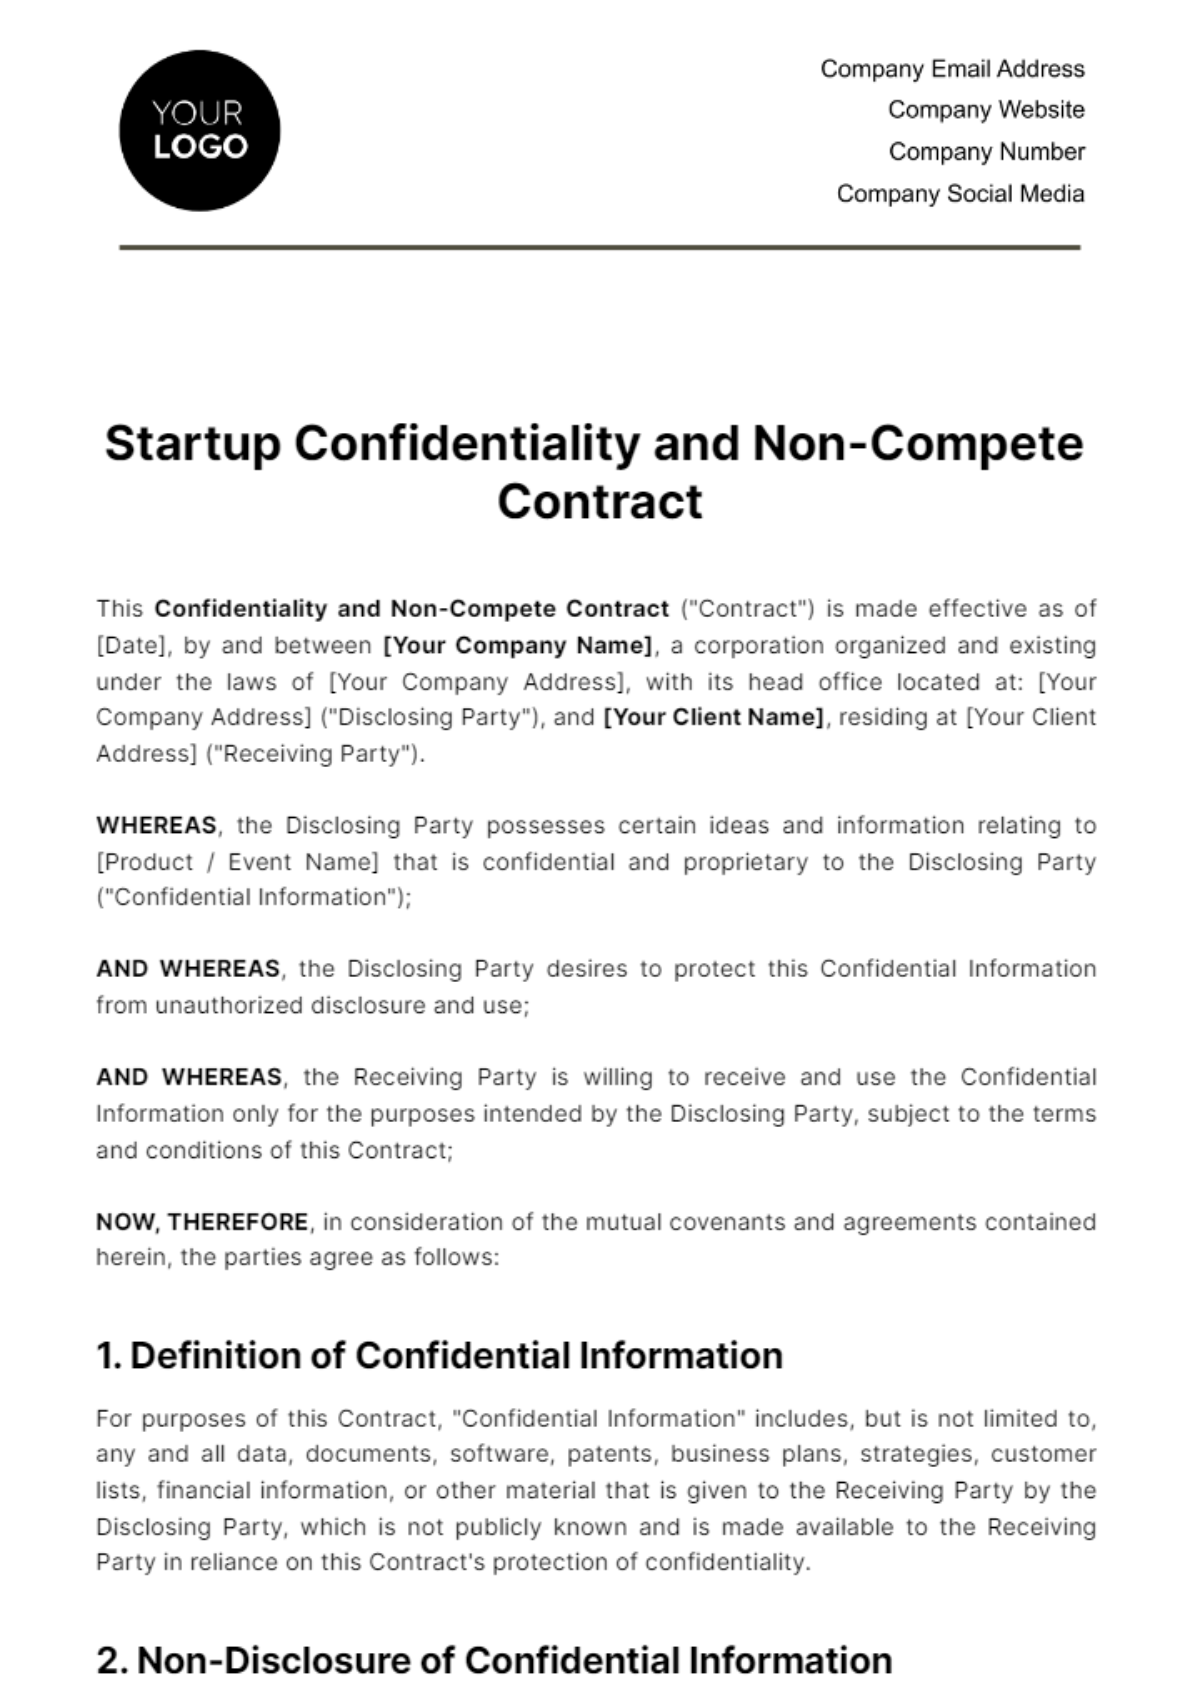 Free Startup Confidentiality and Non-Compete Contract Template